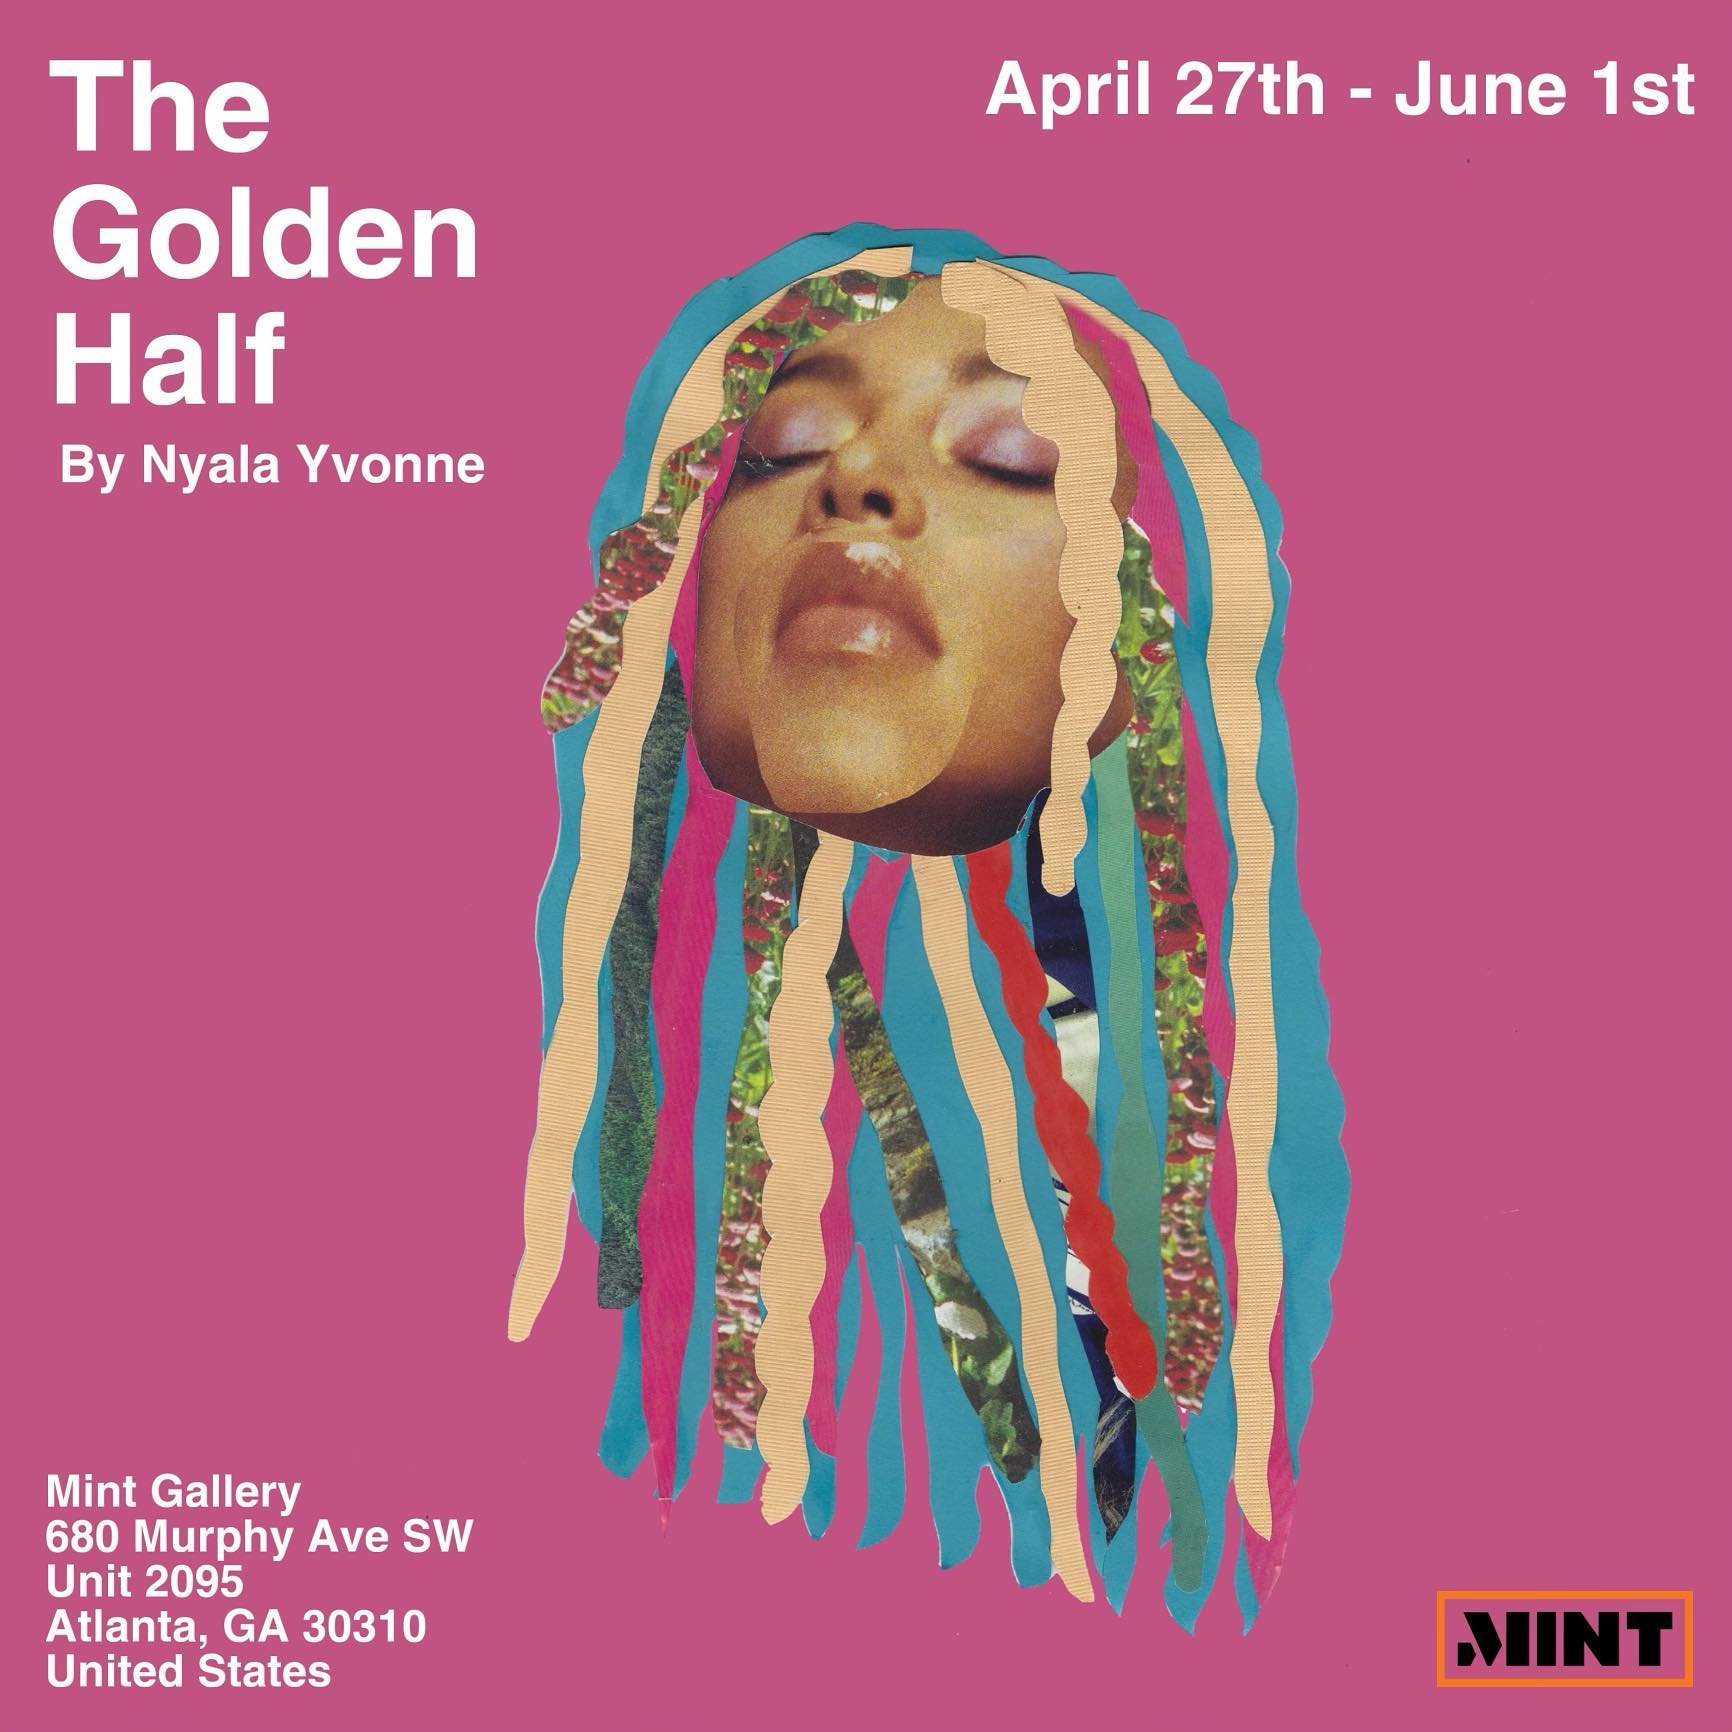 Join us tomorrow, Saturday 4/27 from 6-9pm for &ldquo;The Golden Half&rdquo; Solo exhibition by @golden.half Nyala Yvonne.

&ldquo;The Golden Half&rdquo; is an art exhibition by Nyala Yvonne that weaves together the threads of coming-of-age storytell